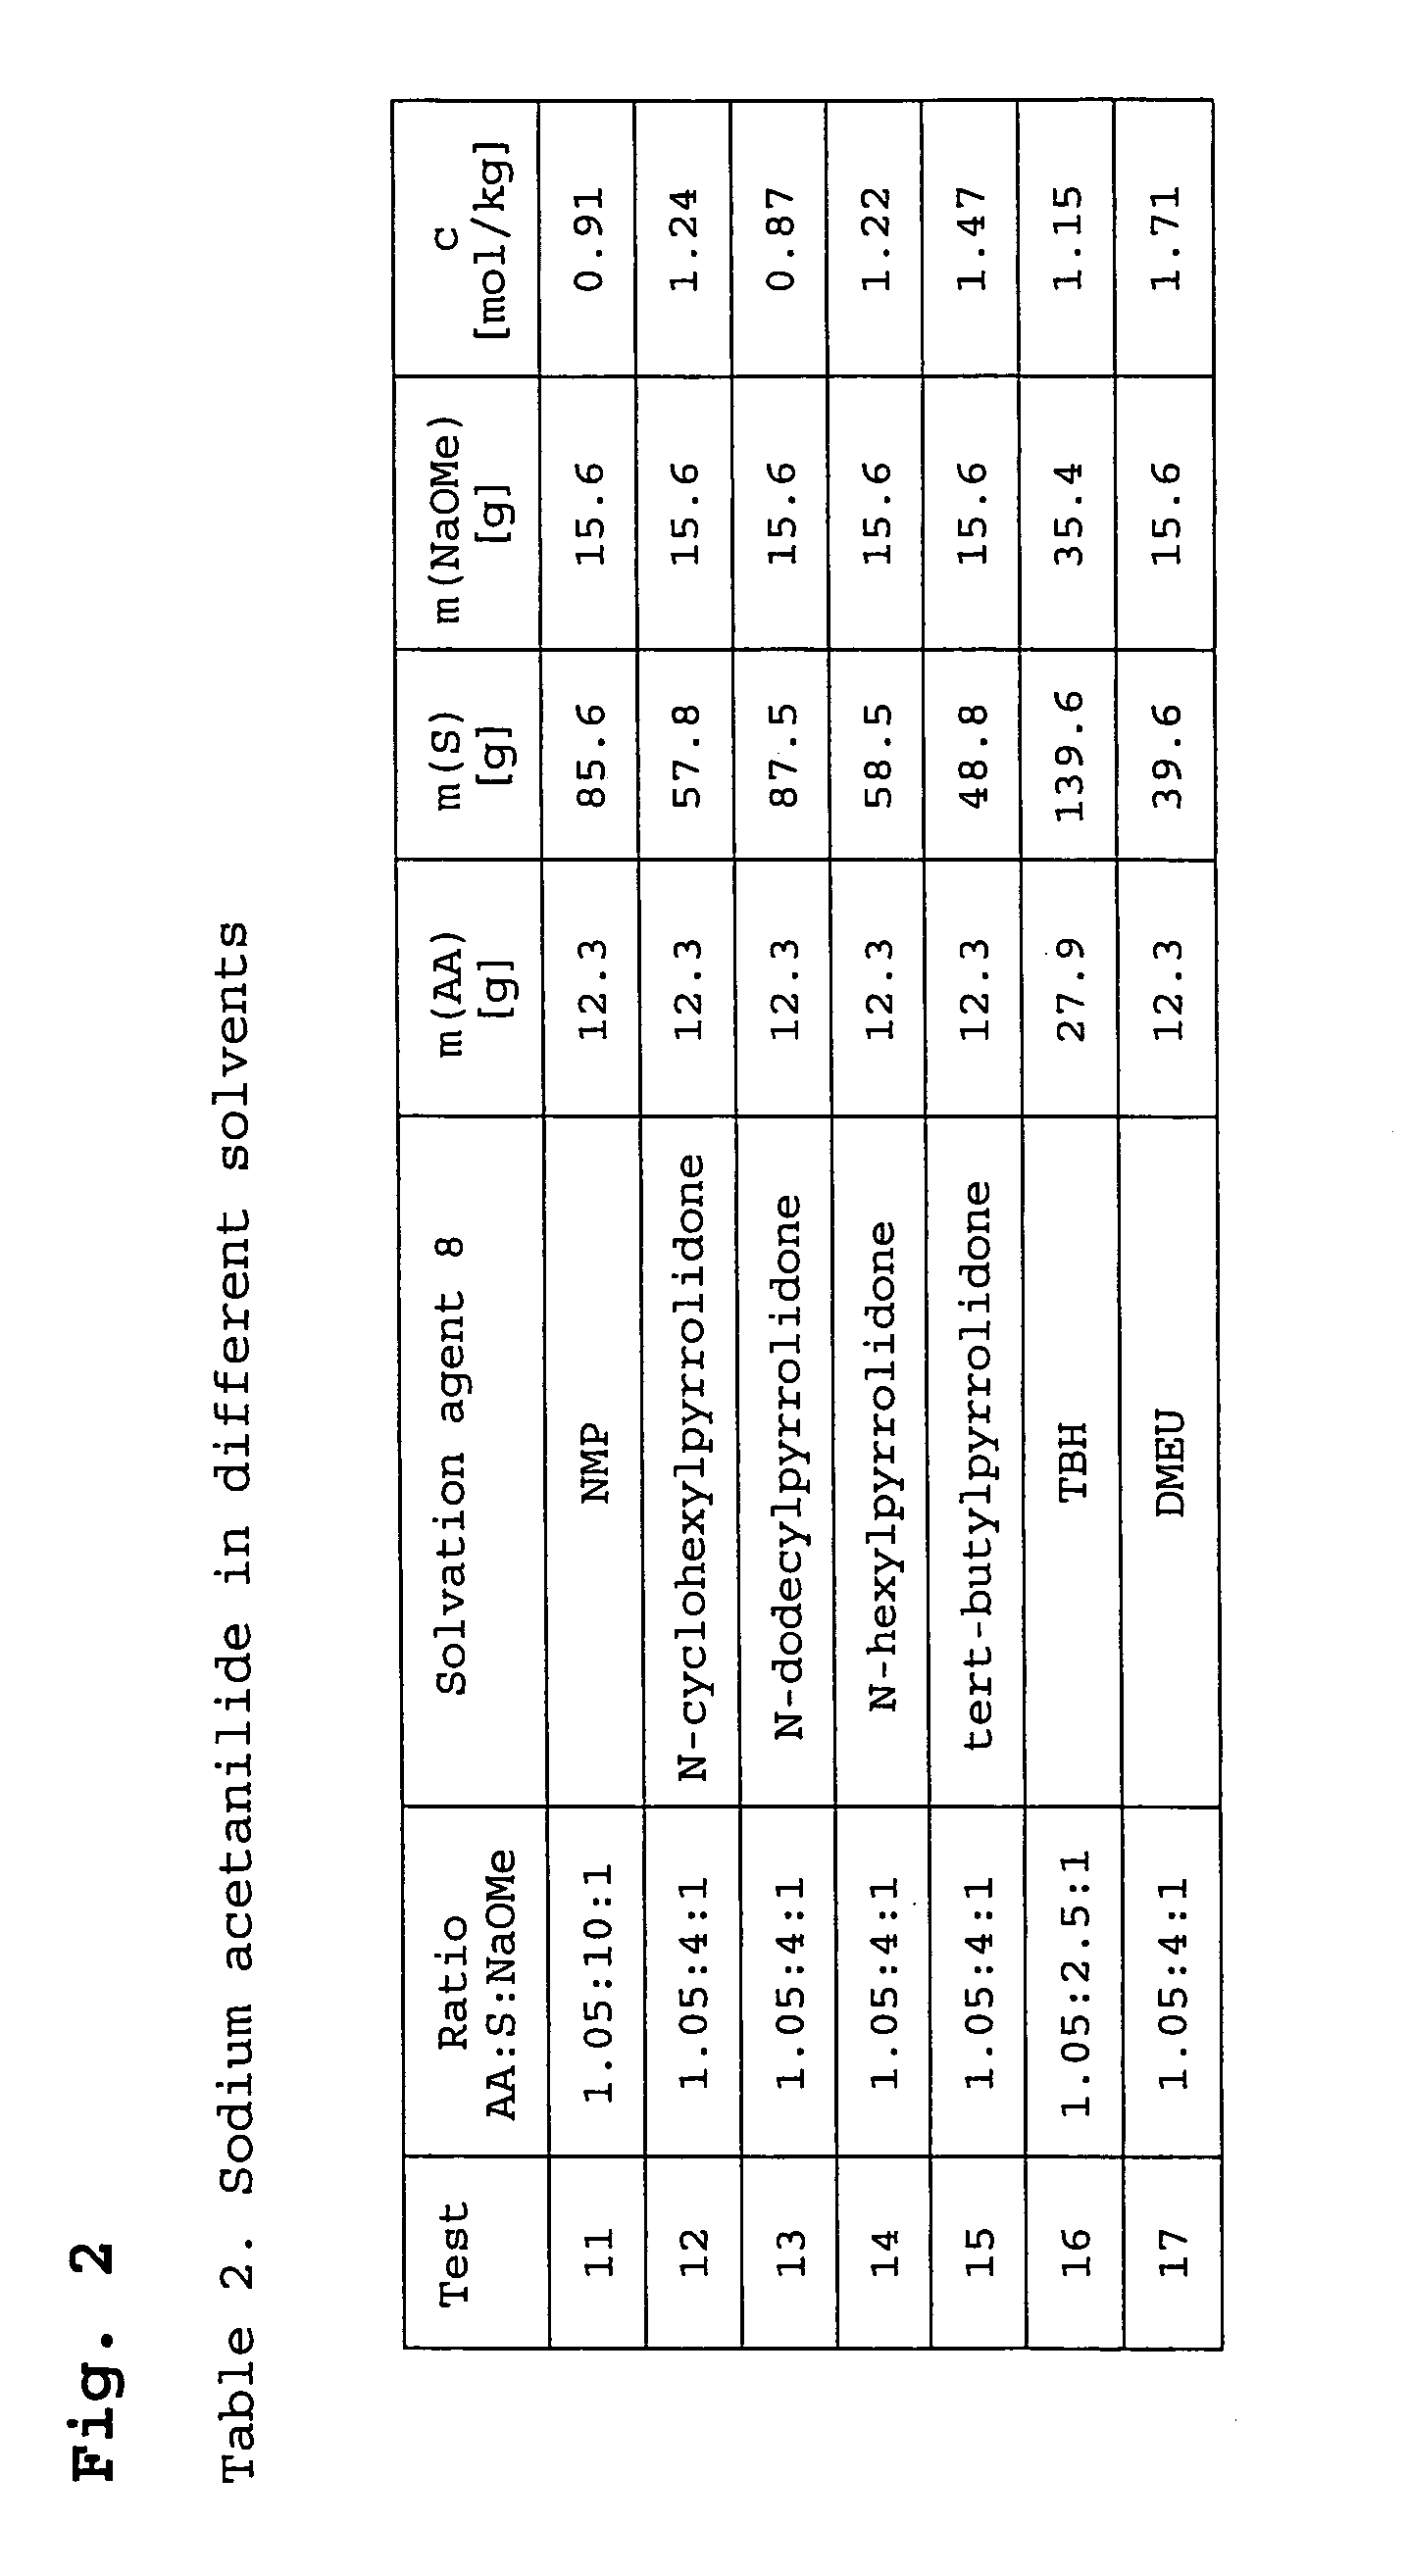 Catalyst solution for implementing anionic lactam polymerization, method for production thereof and polyamide moulding compound